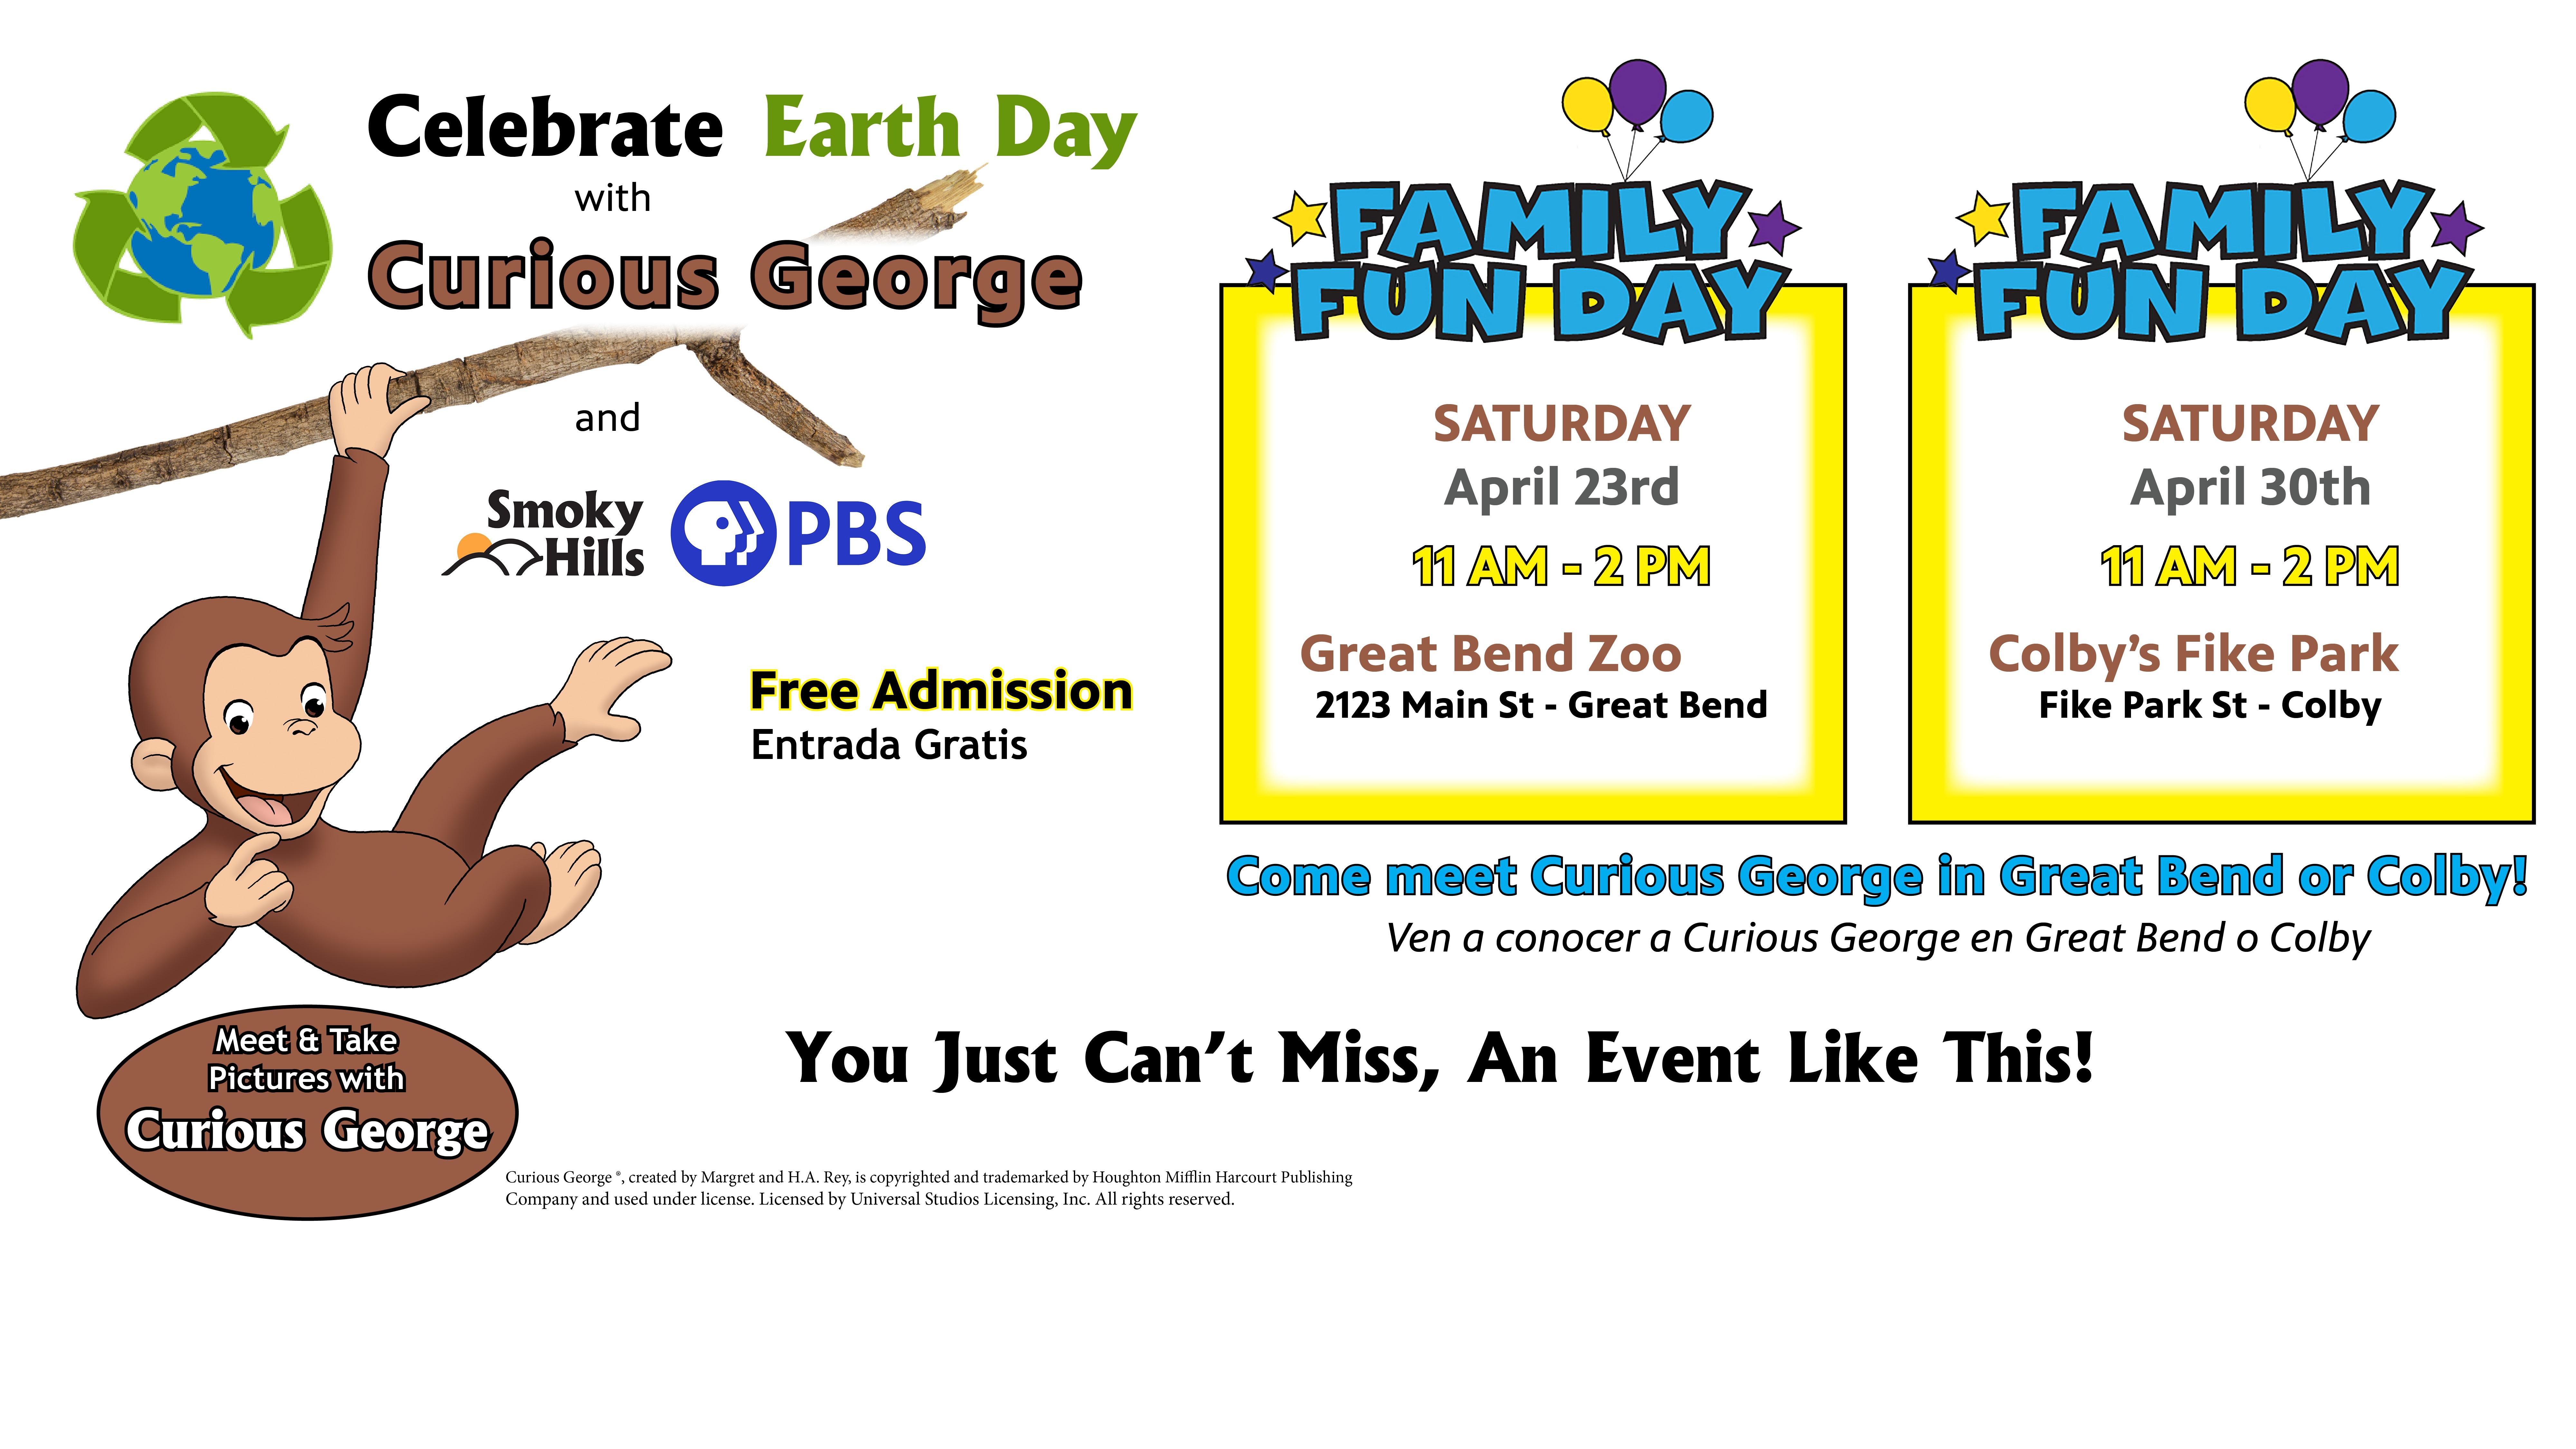 Come Meet Curious George in Great Bend or Colby